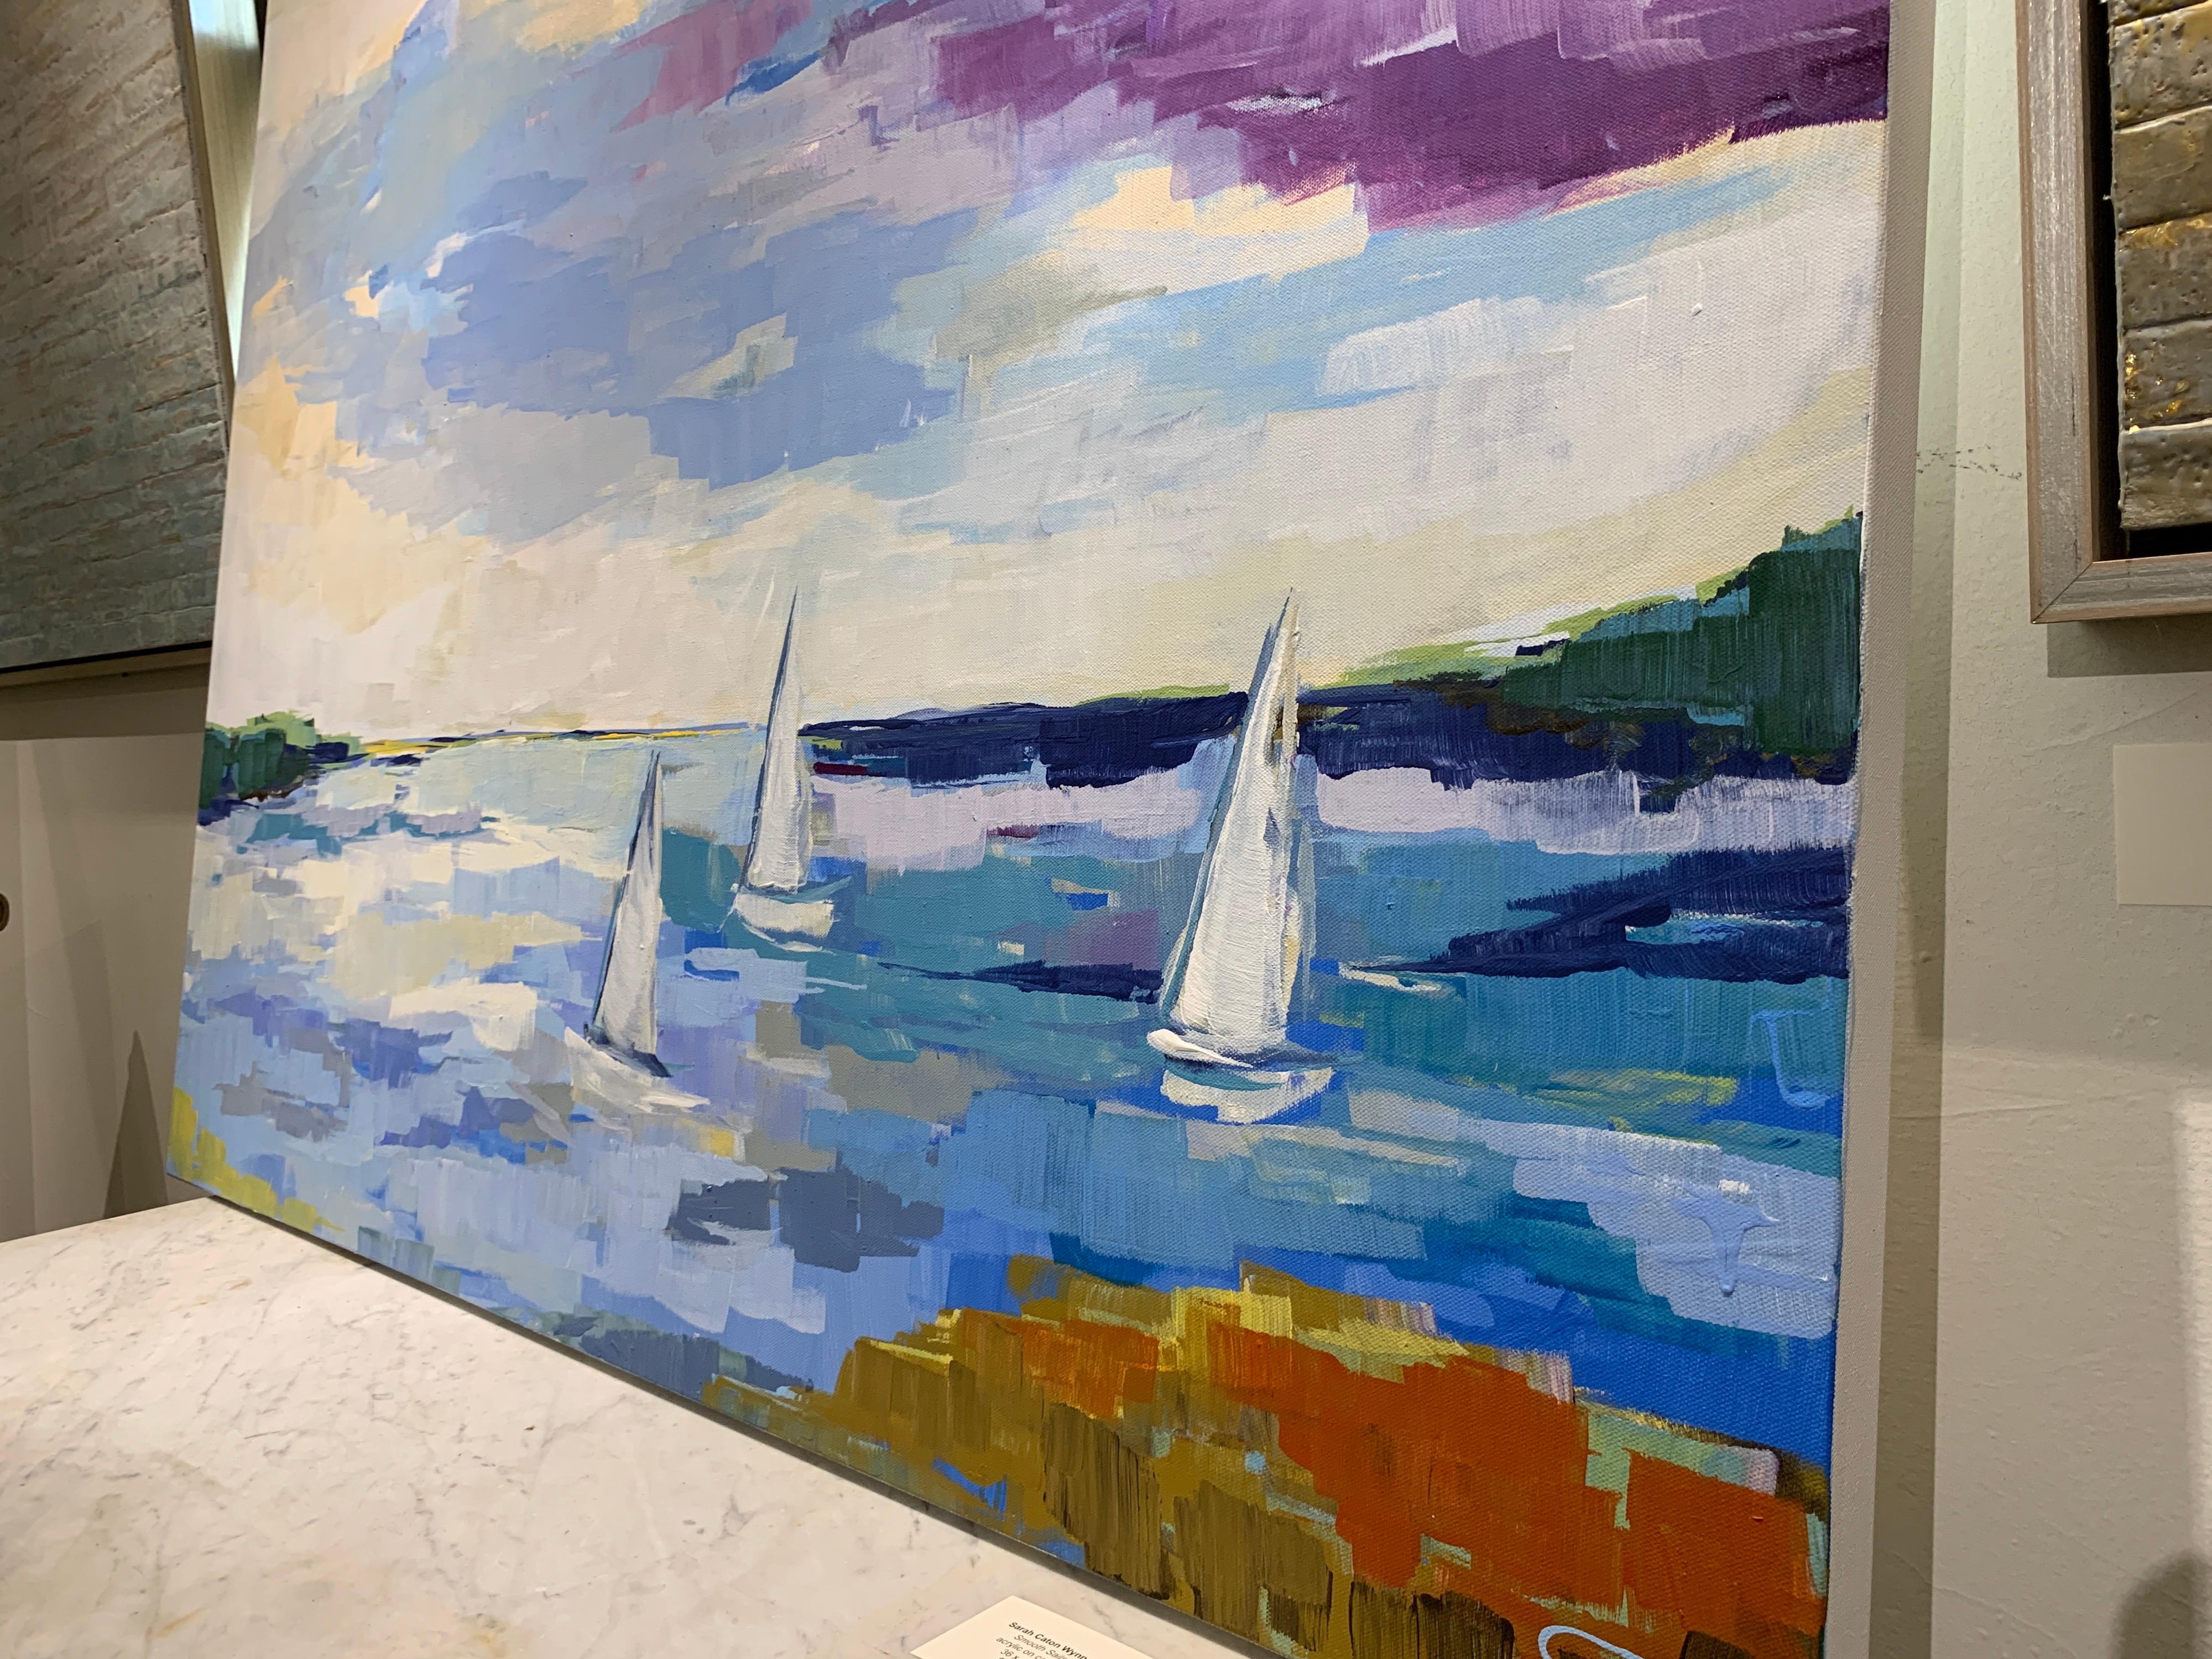 Smooth Sails by Sarah Caton Wynne, Large Horizontal Beach Painting 1